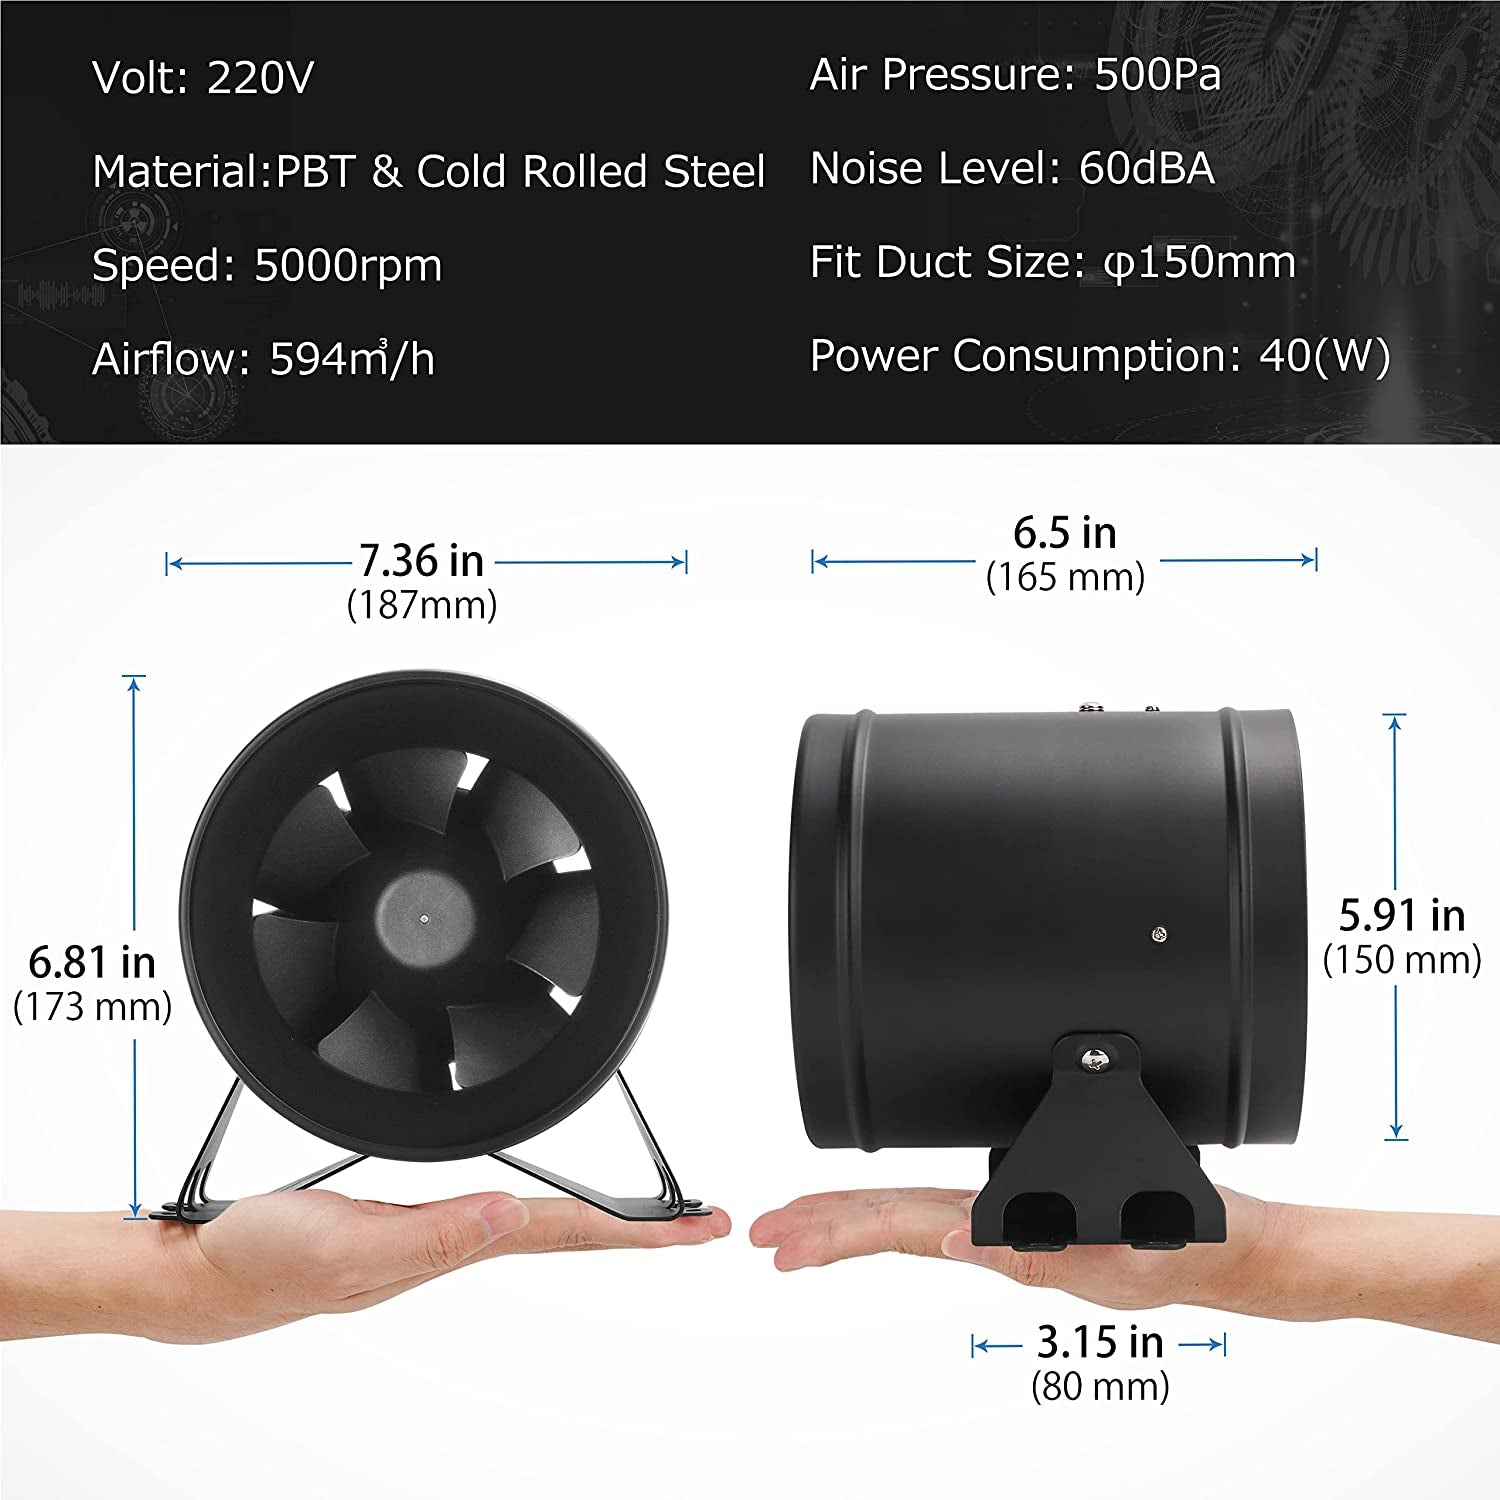 DUCTURBO, DUCTURBO 6 Inch Inline Duct Fans, 350 CFM Ventilation Exhaust Fan Ideal for Indoor Heating Cooling Transfer or Grow Tents Air Boosting, with Variable Speed Controller